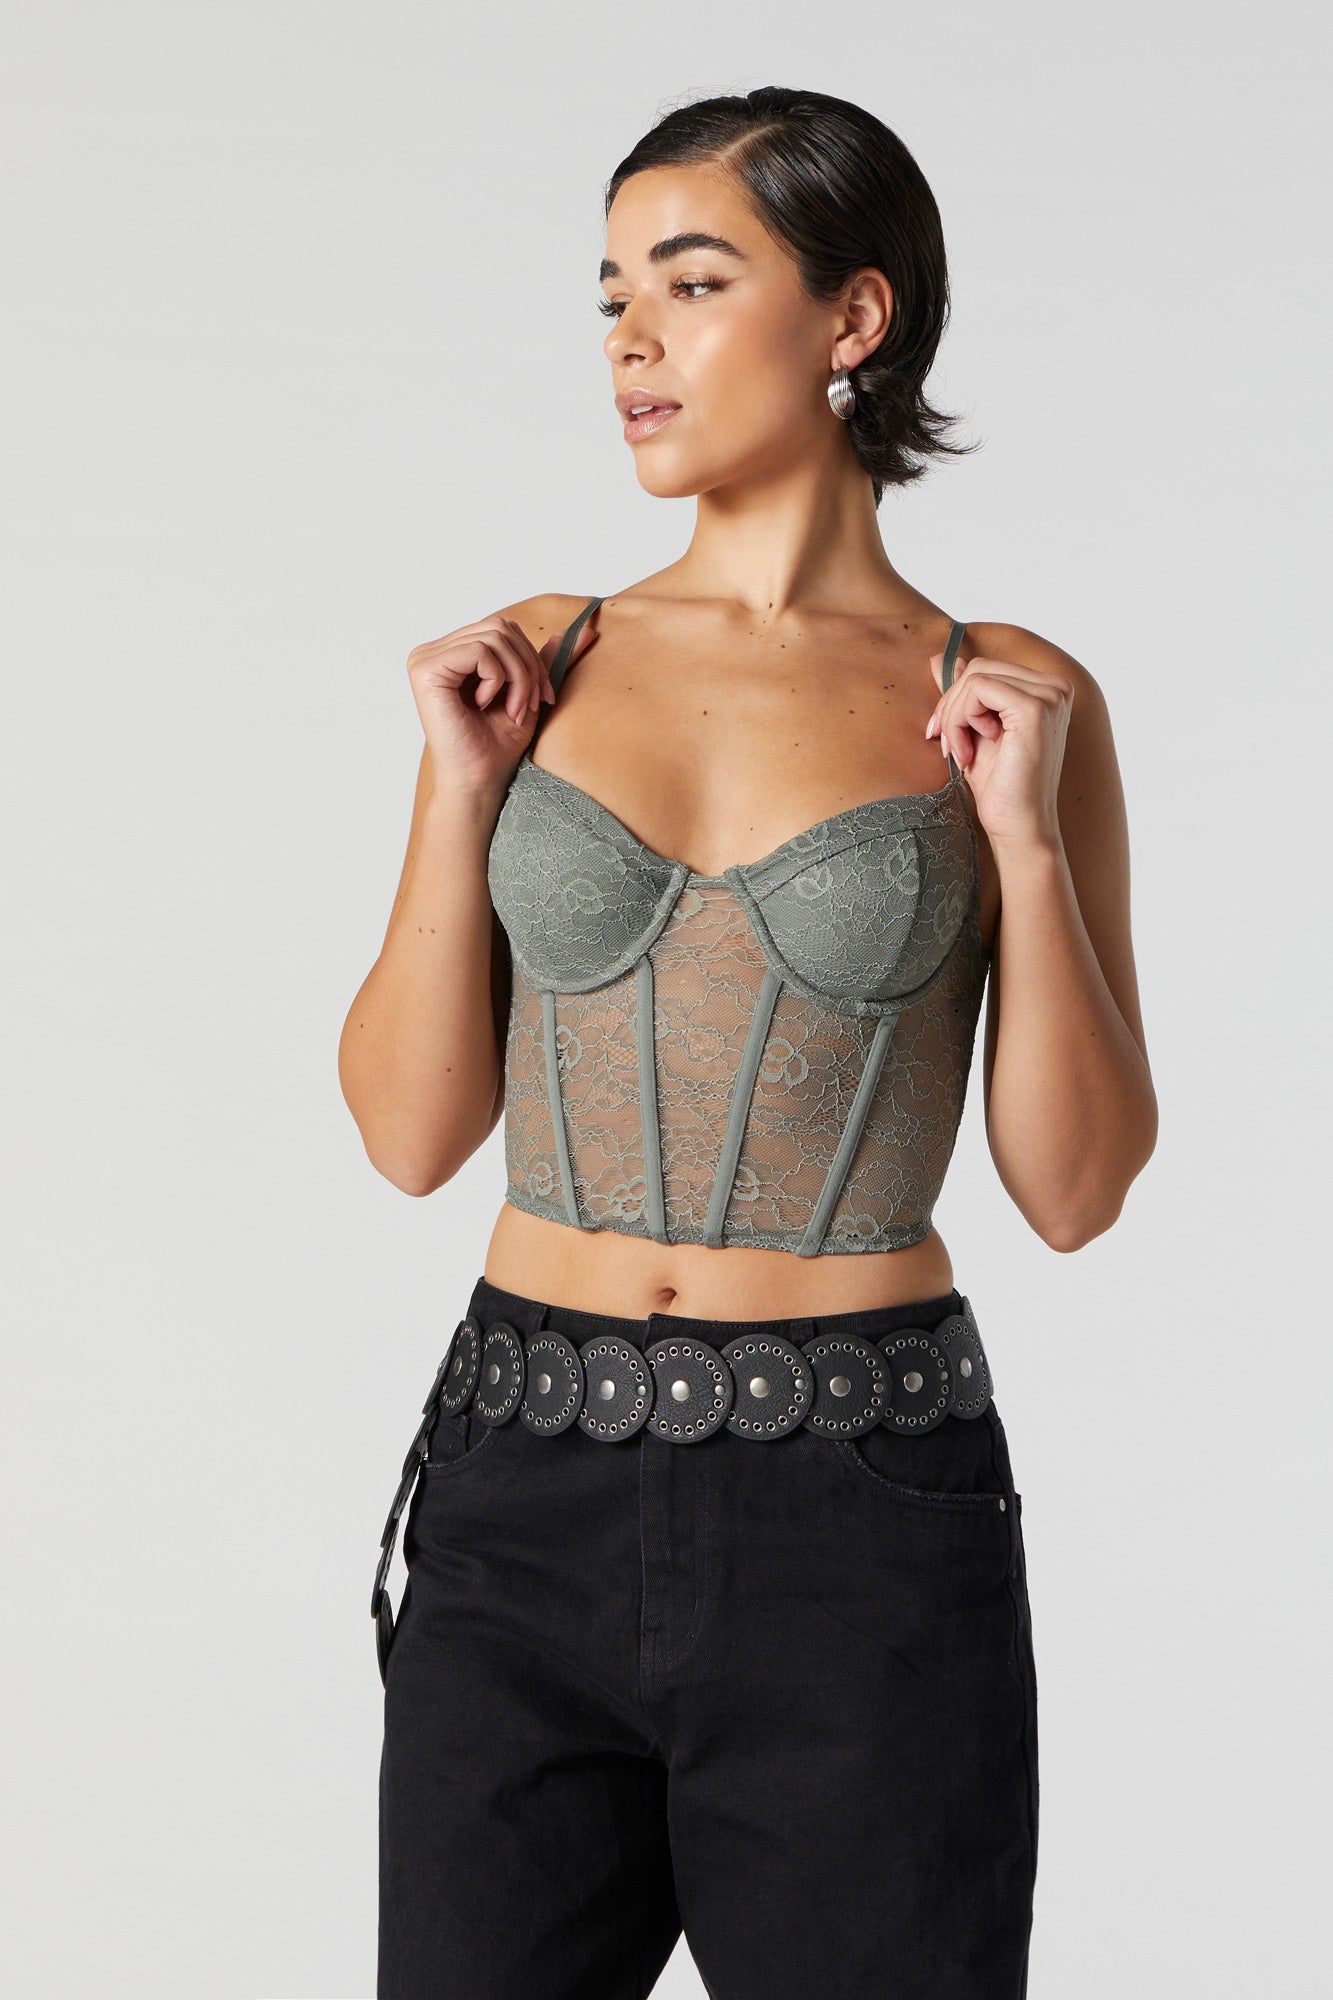 Get Discount on Corset Tops for Women Online at a la mode